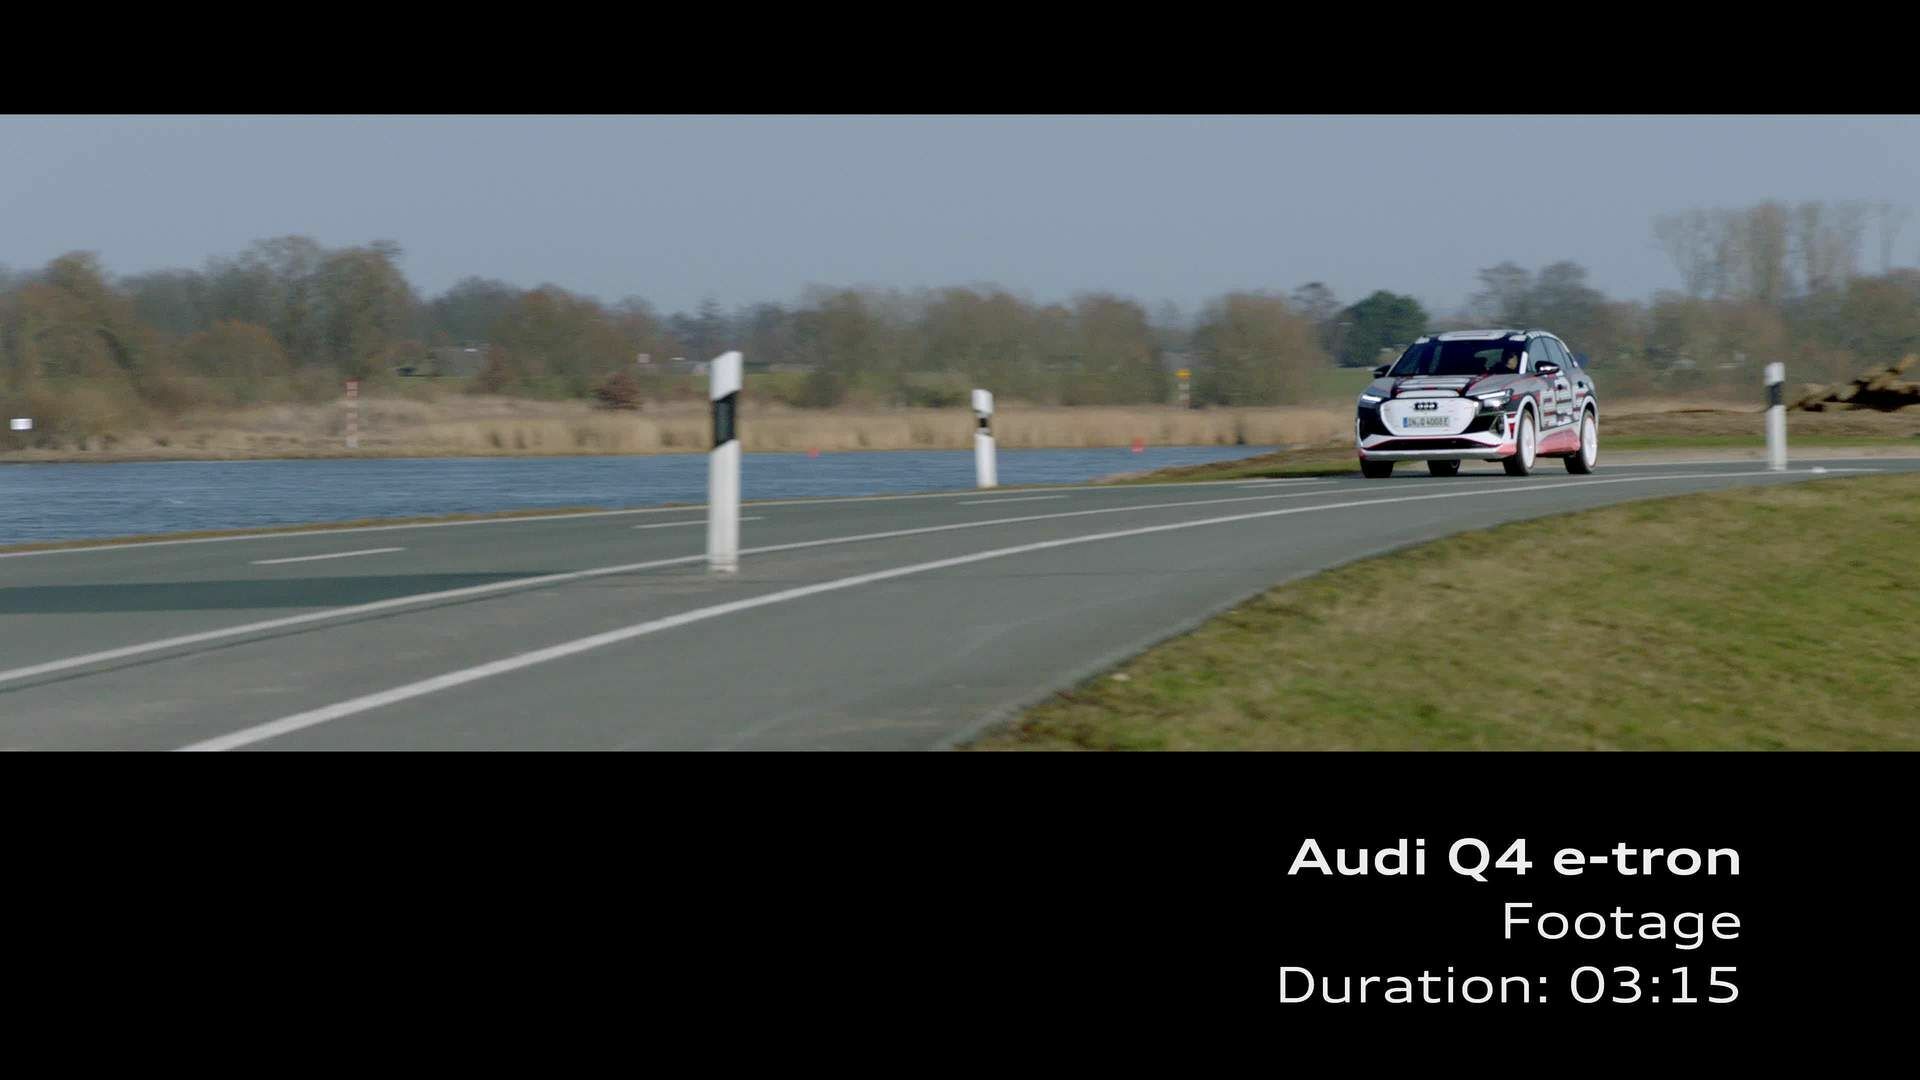 Footage: Driving scenes of the Audi Q4 e-tron